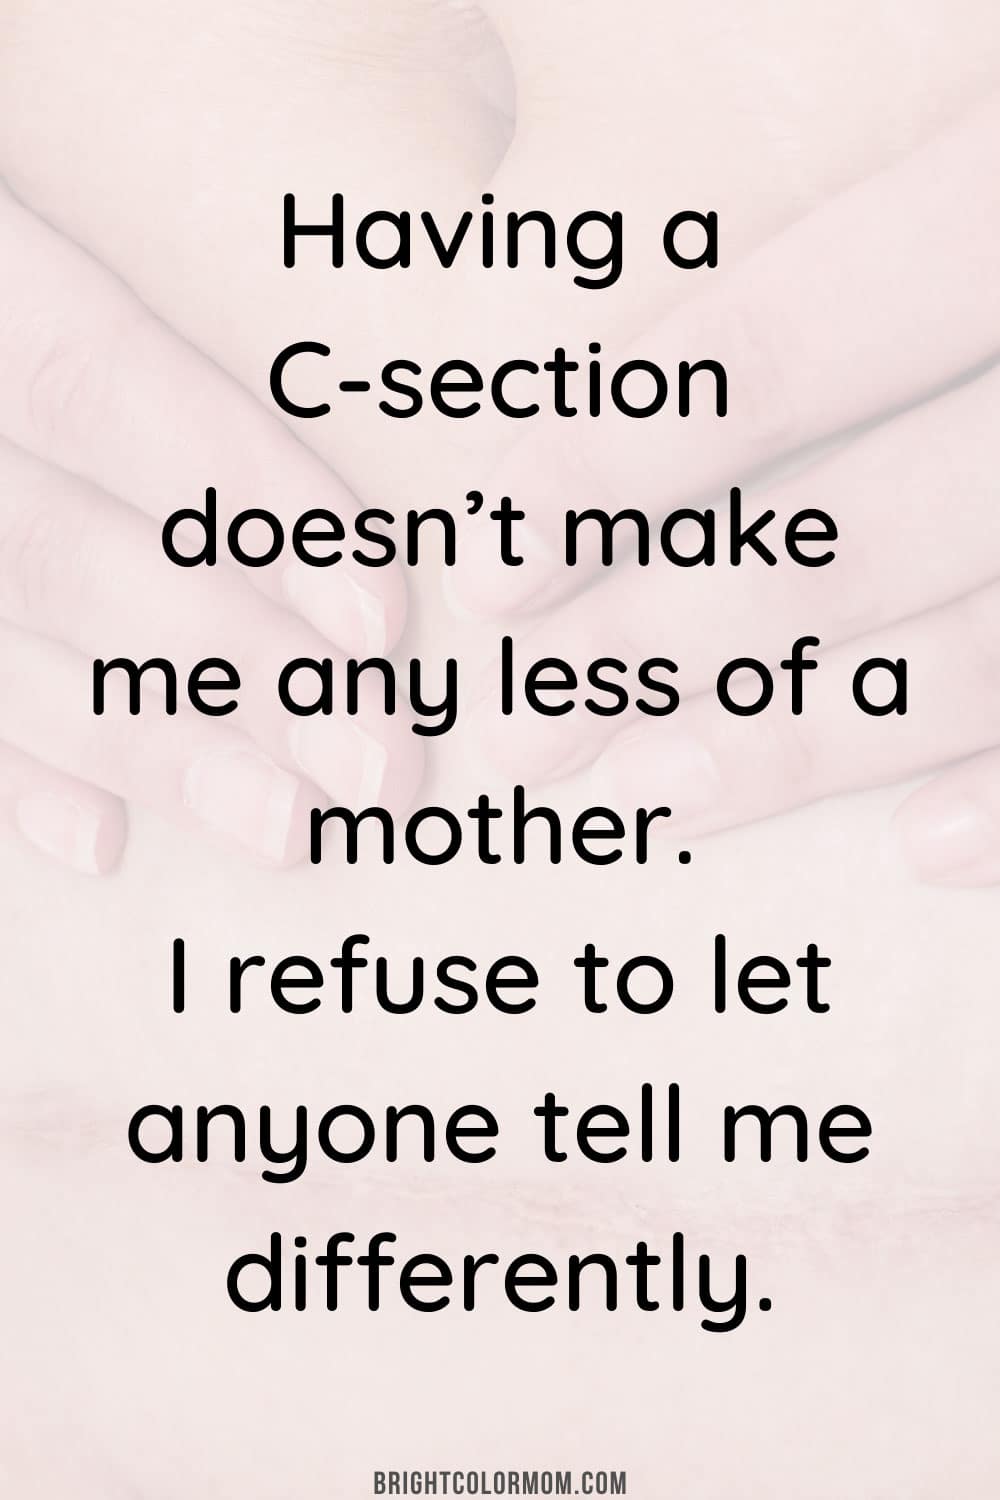 Having a C-section doesn’t make me any less of a mother. I refuse to let anyone tell me differently.